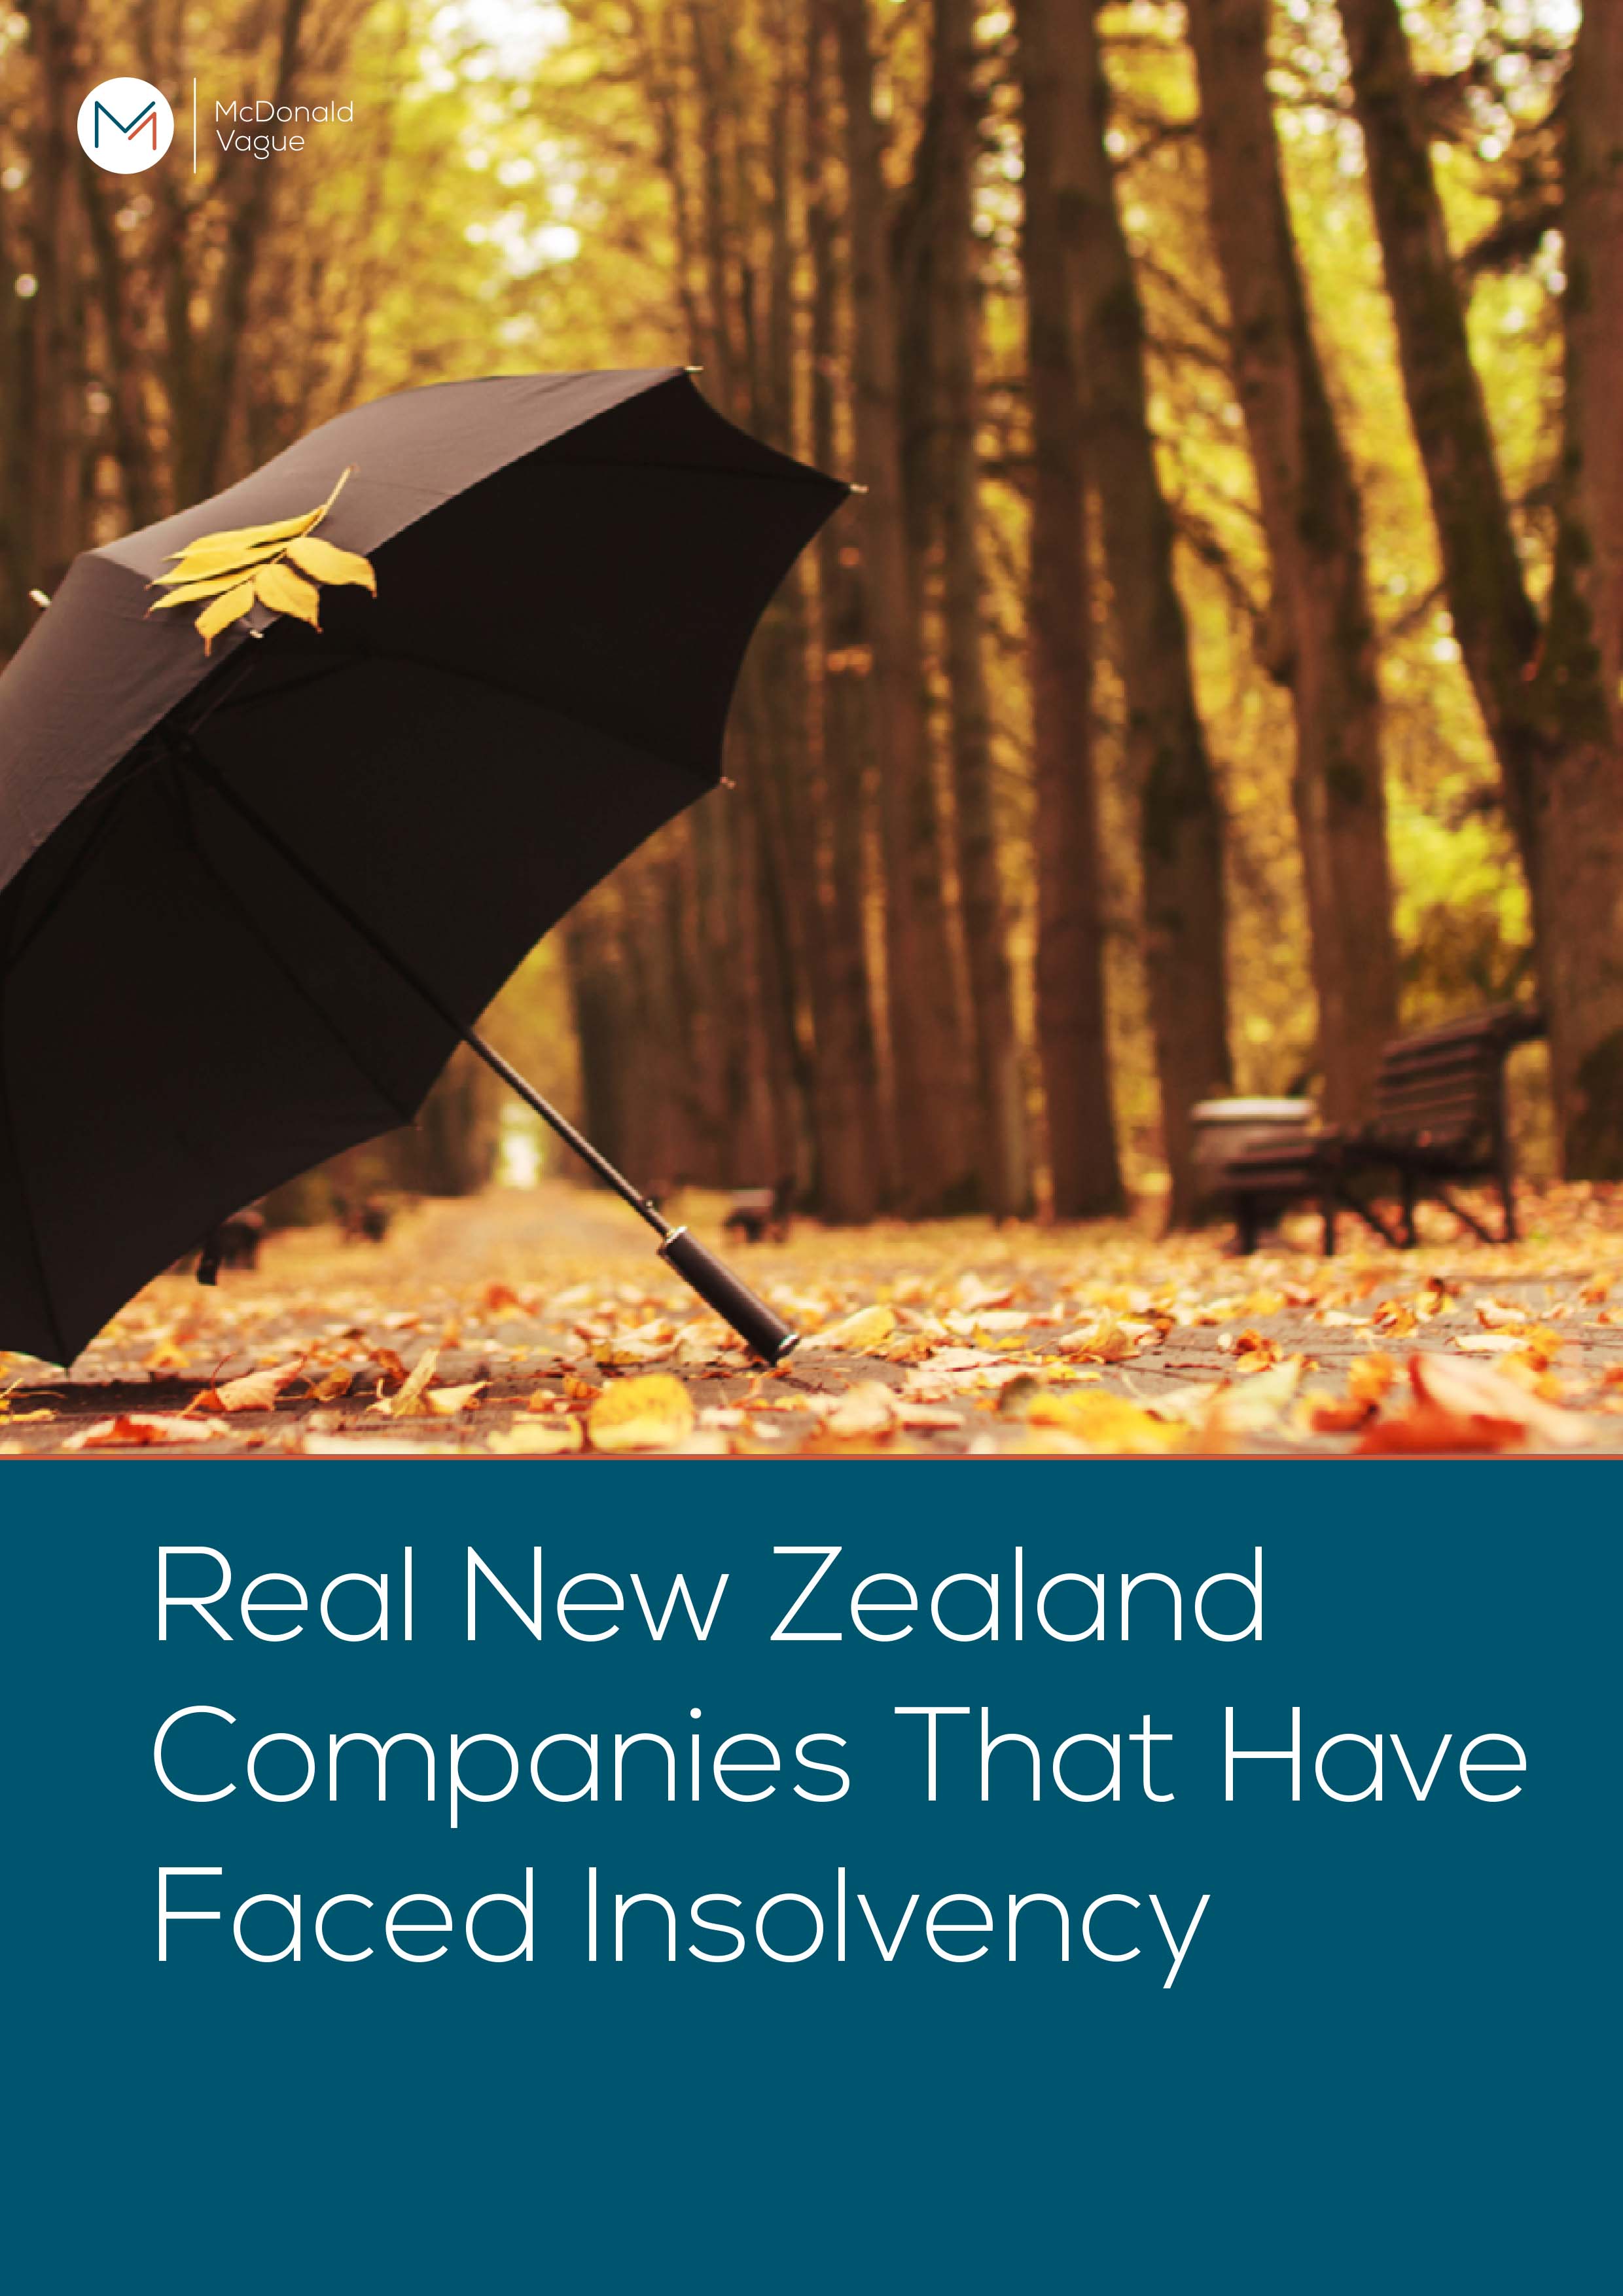 Real New Zealand Companies That Have Faced Insolvency